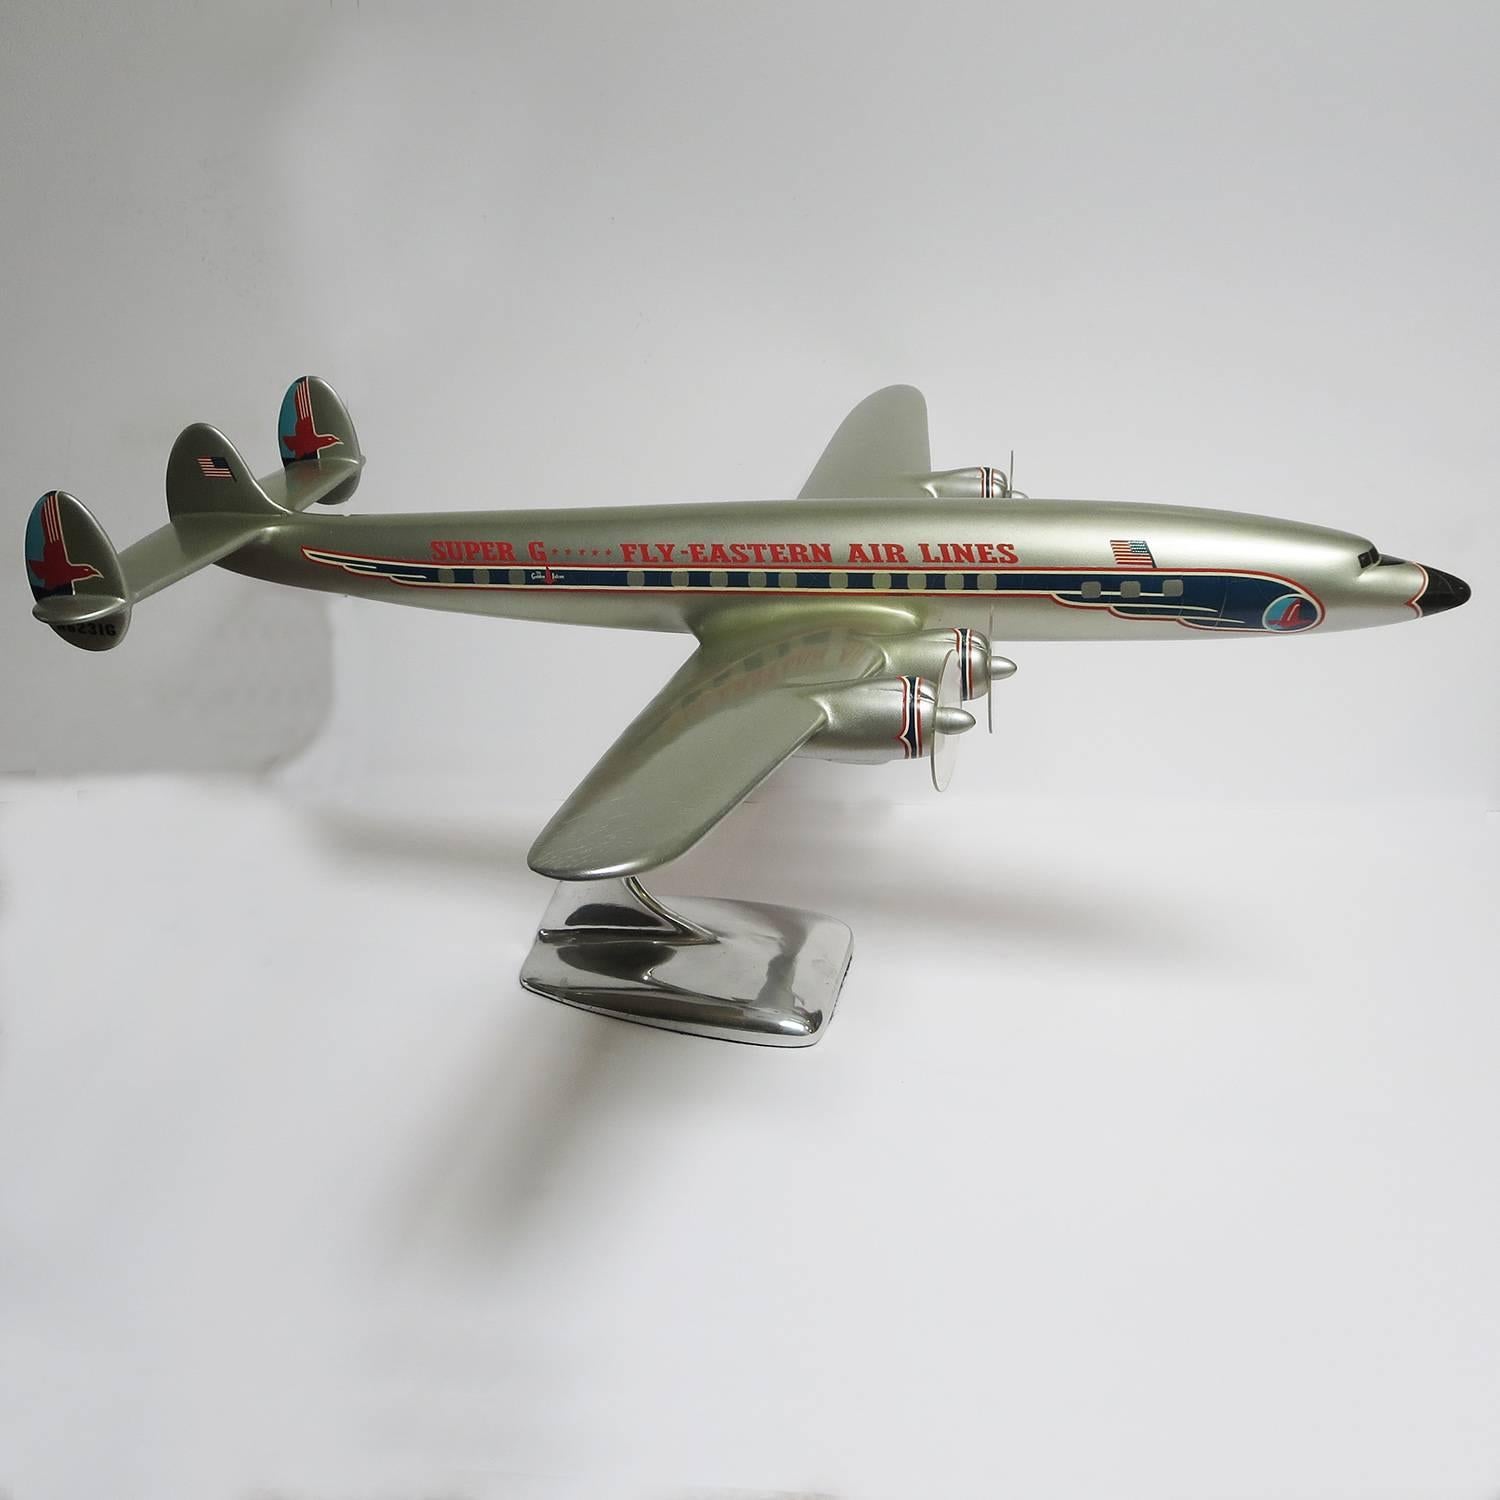 Launched in 1951 as the answer to Douglas Aircraft's DC 6, the Lockheed 